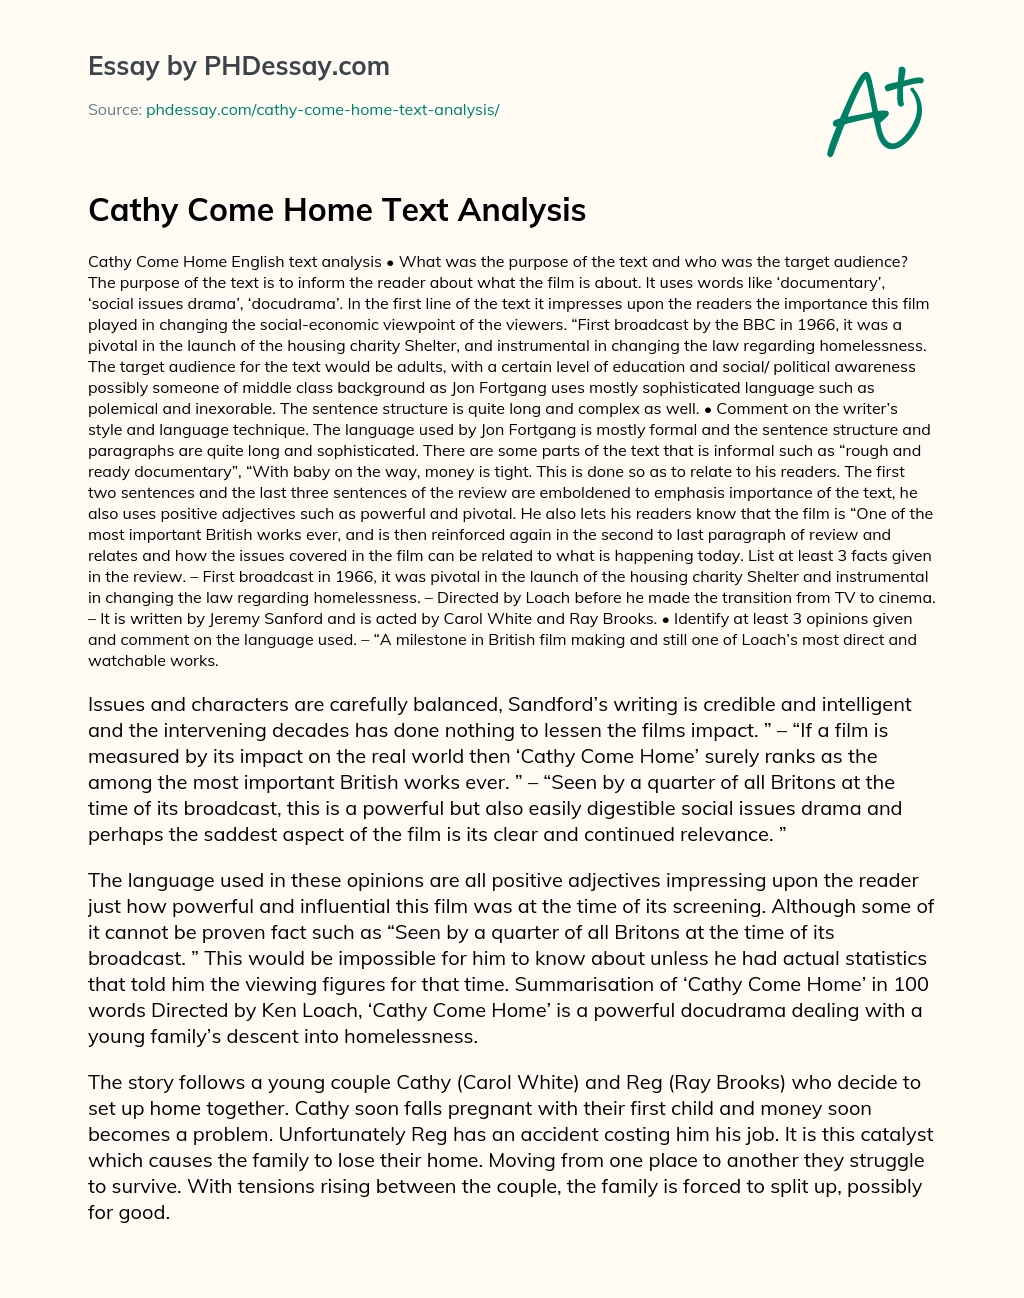 Cathy Come Home Text Analysis essay